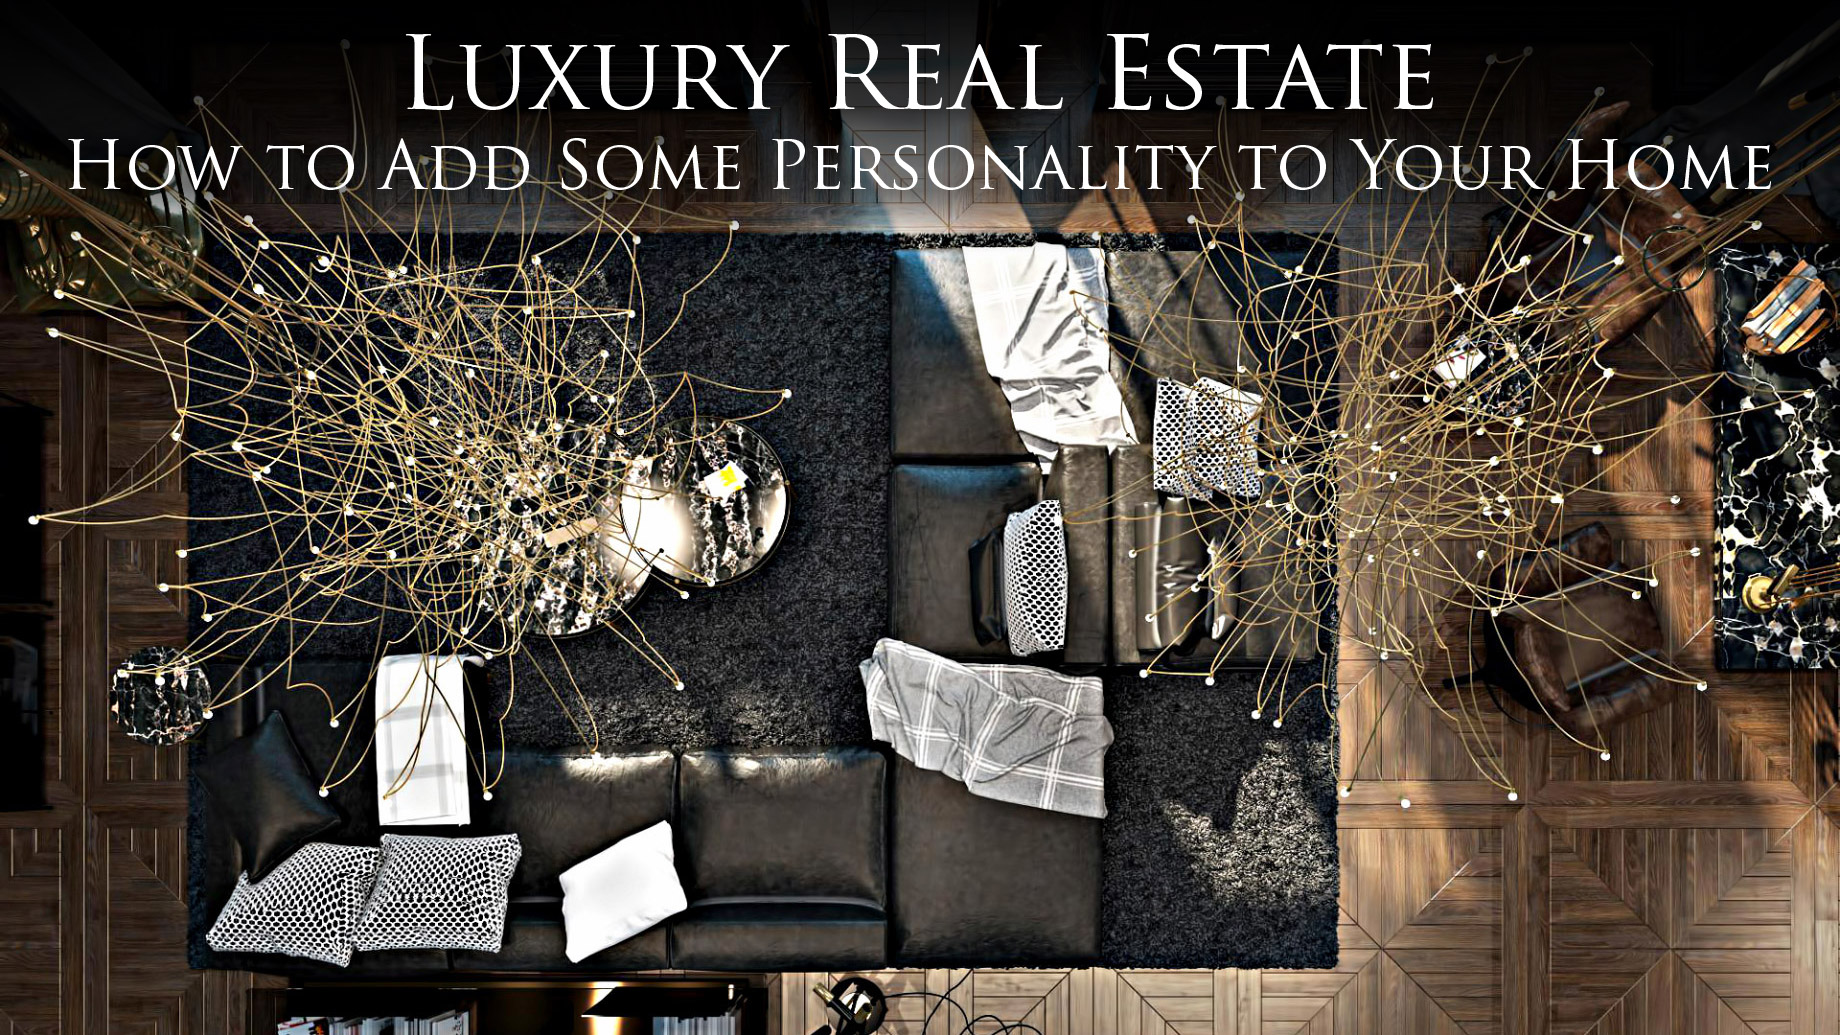 Luxury Real Estate - How to Add Some Personality to Your Home